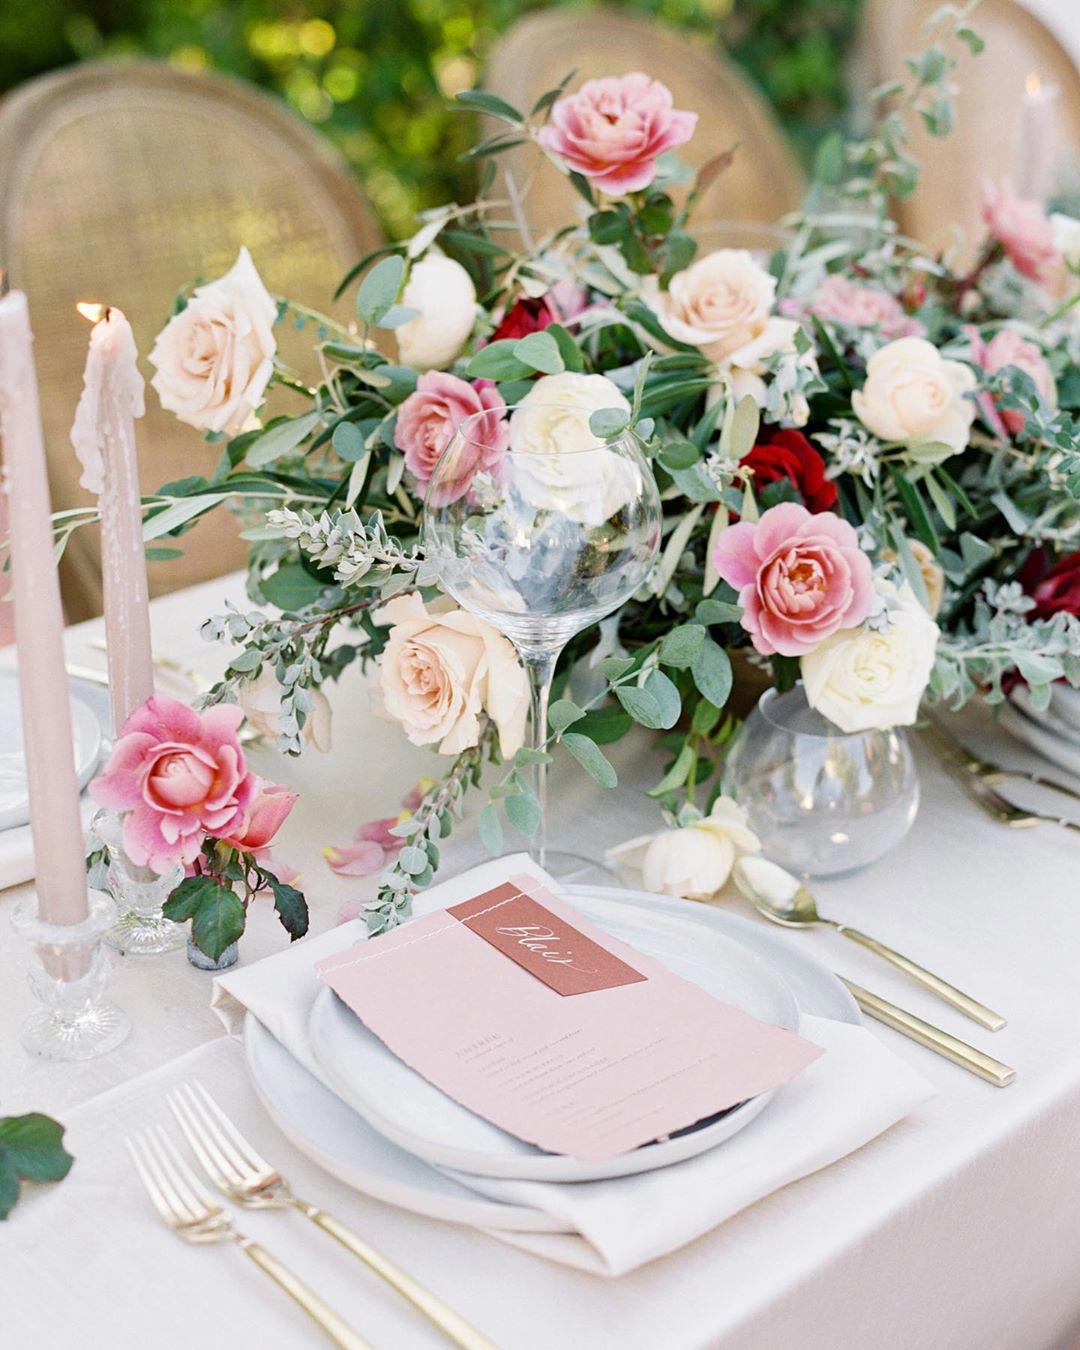 wedding colors bubble pink cotton candy red jannabrowndesignco table seatting